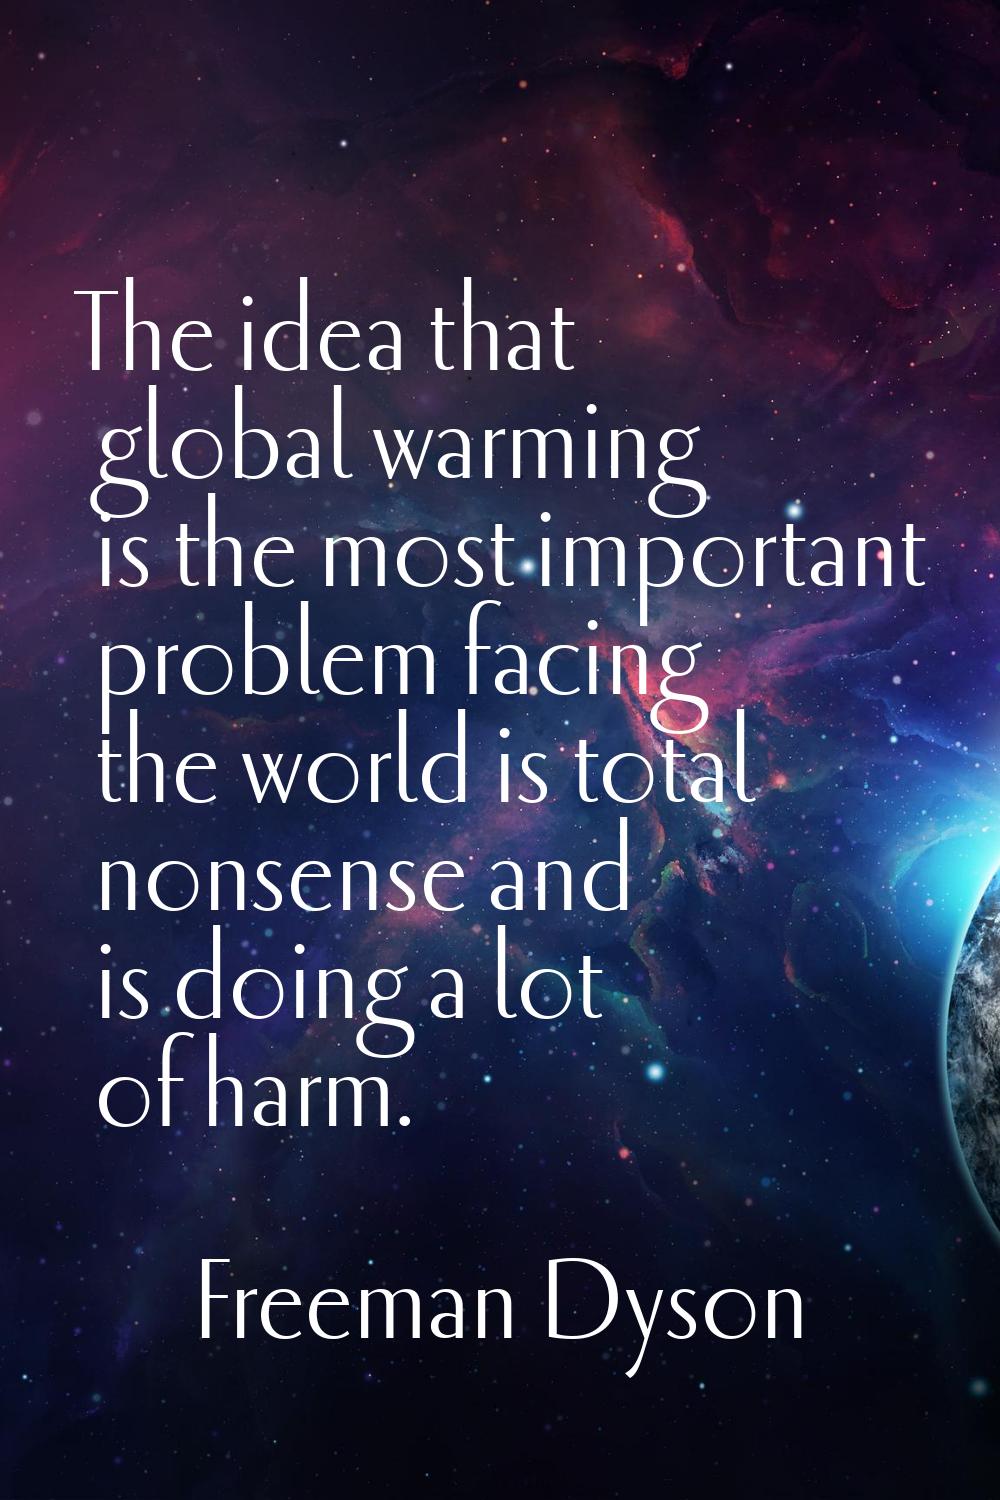 The idea that global warming is the most important problem facing the world is total nonsense and i